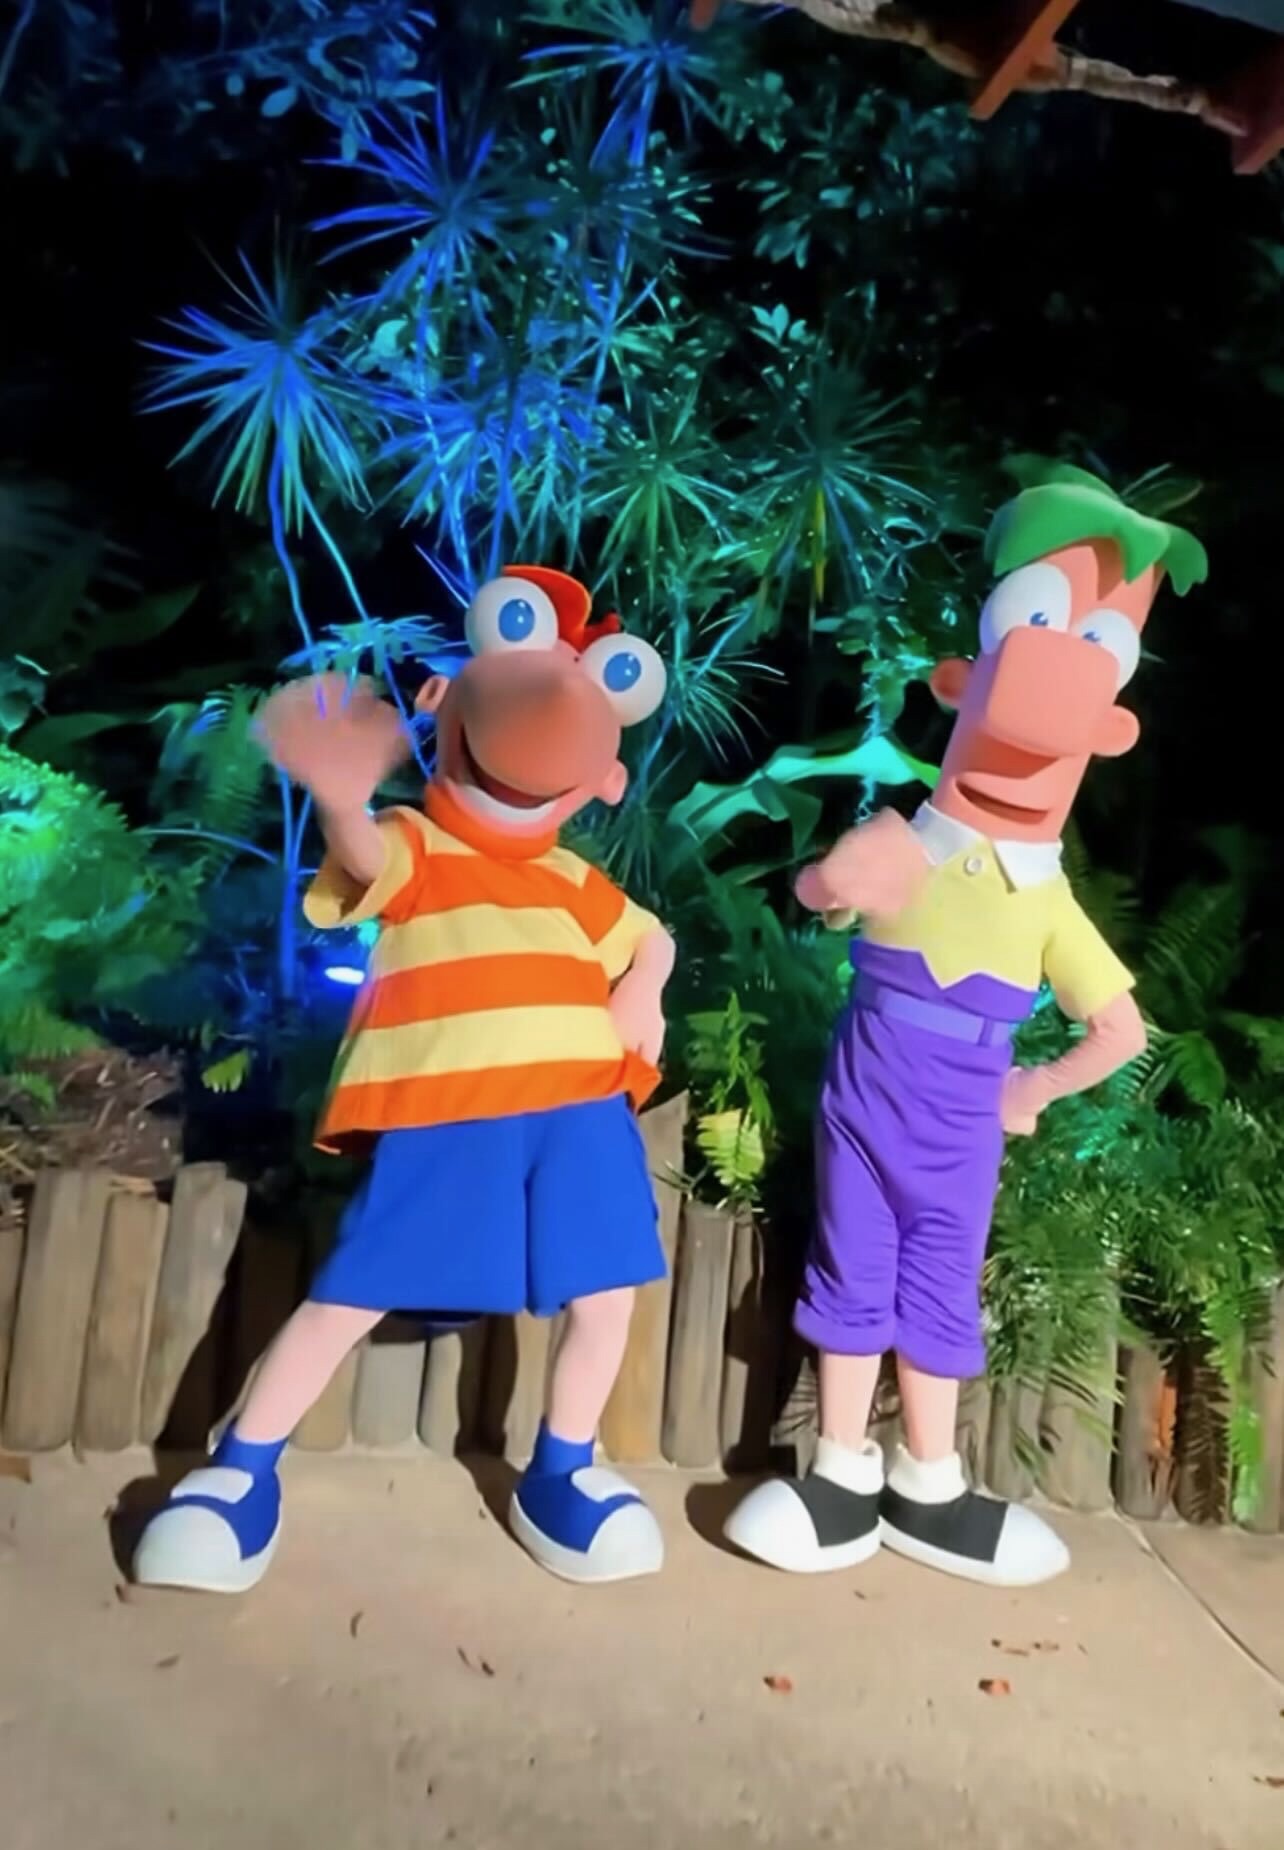 Phineas & Ferb Meet-and-Greet at H20 Glow Nights at Disney's